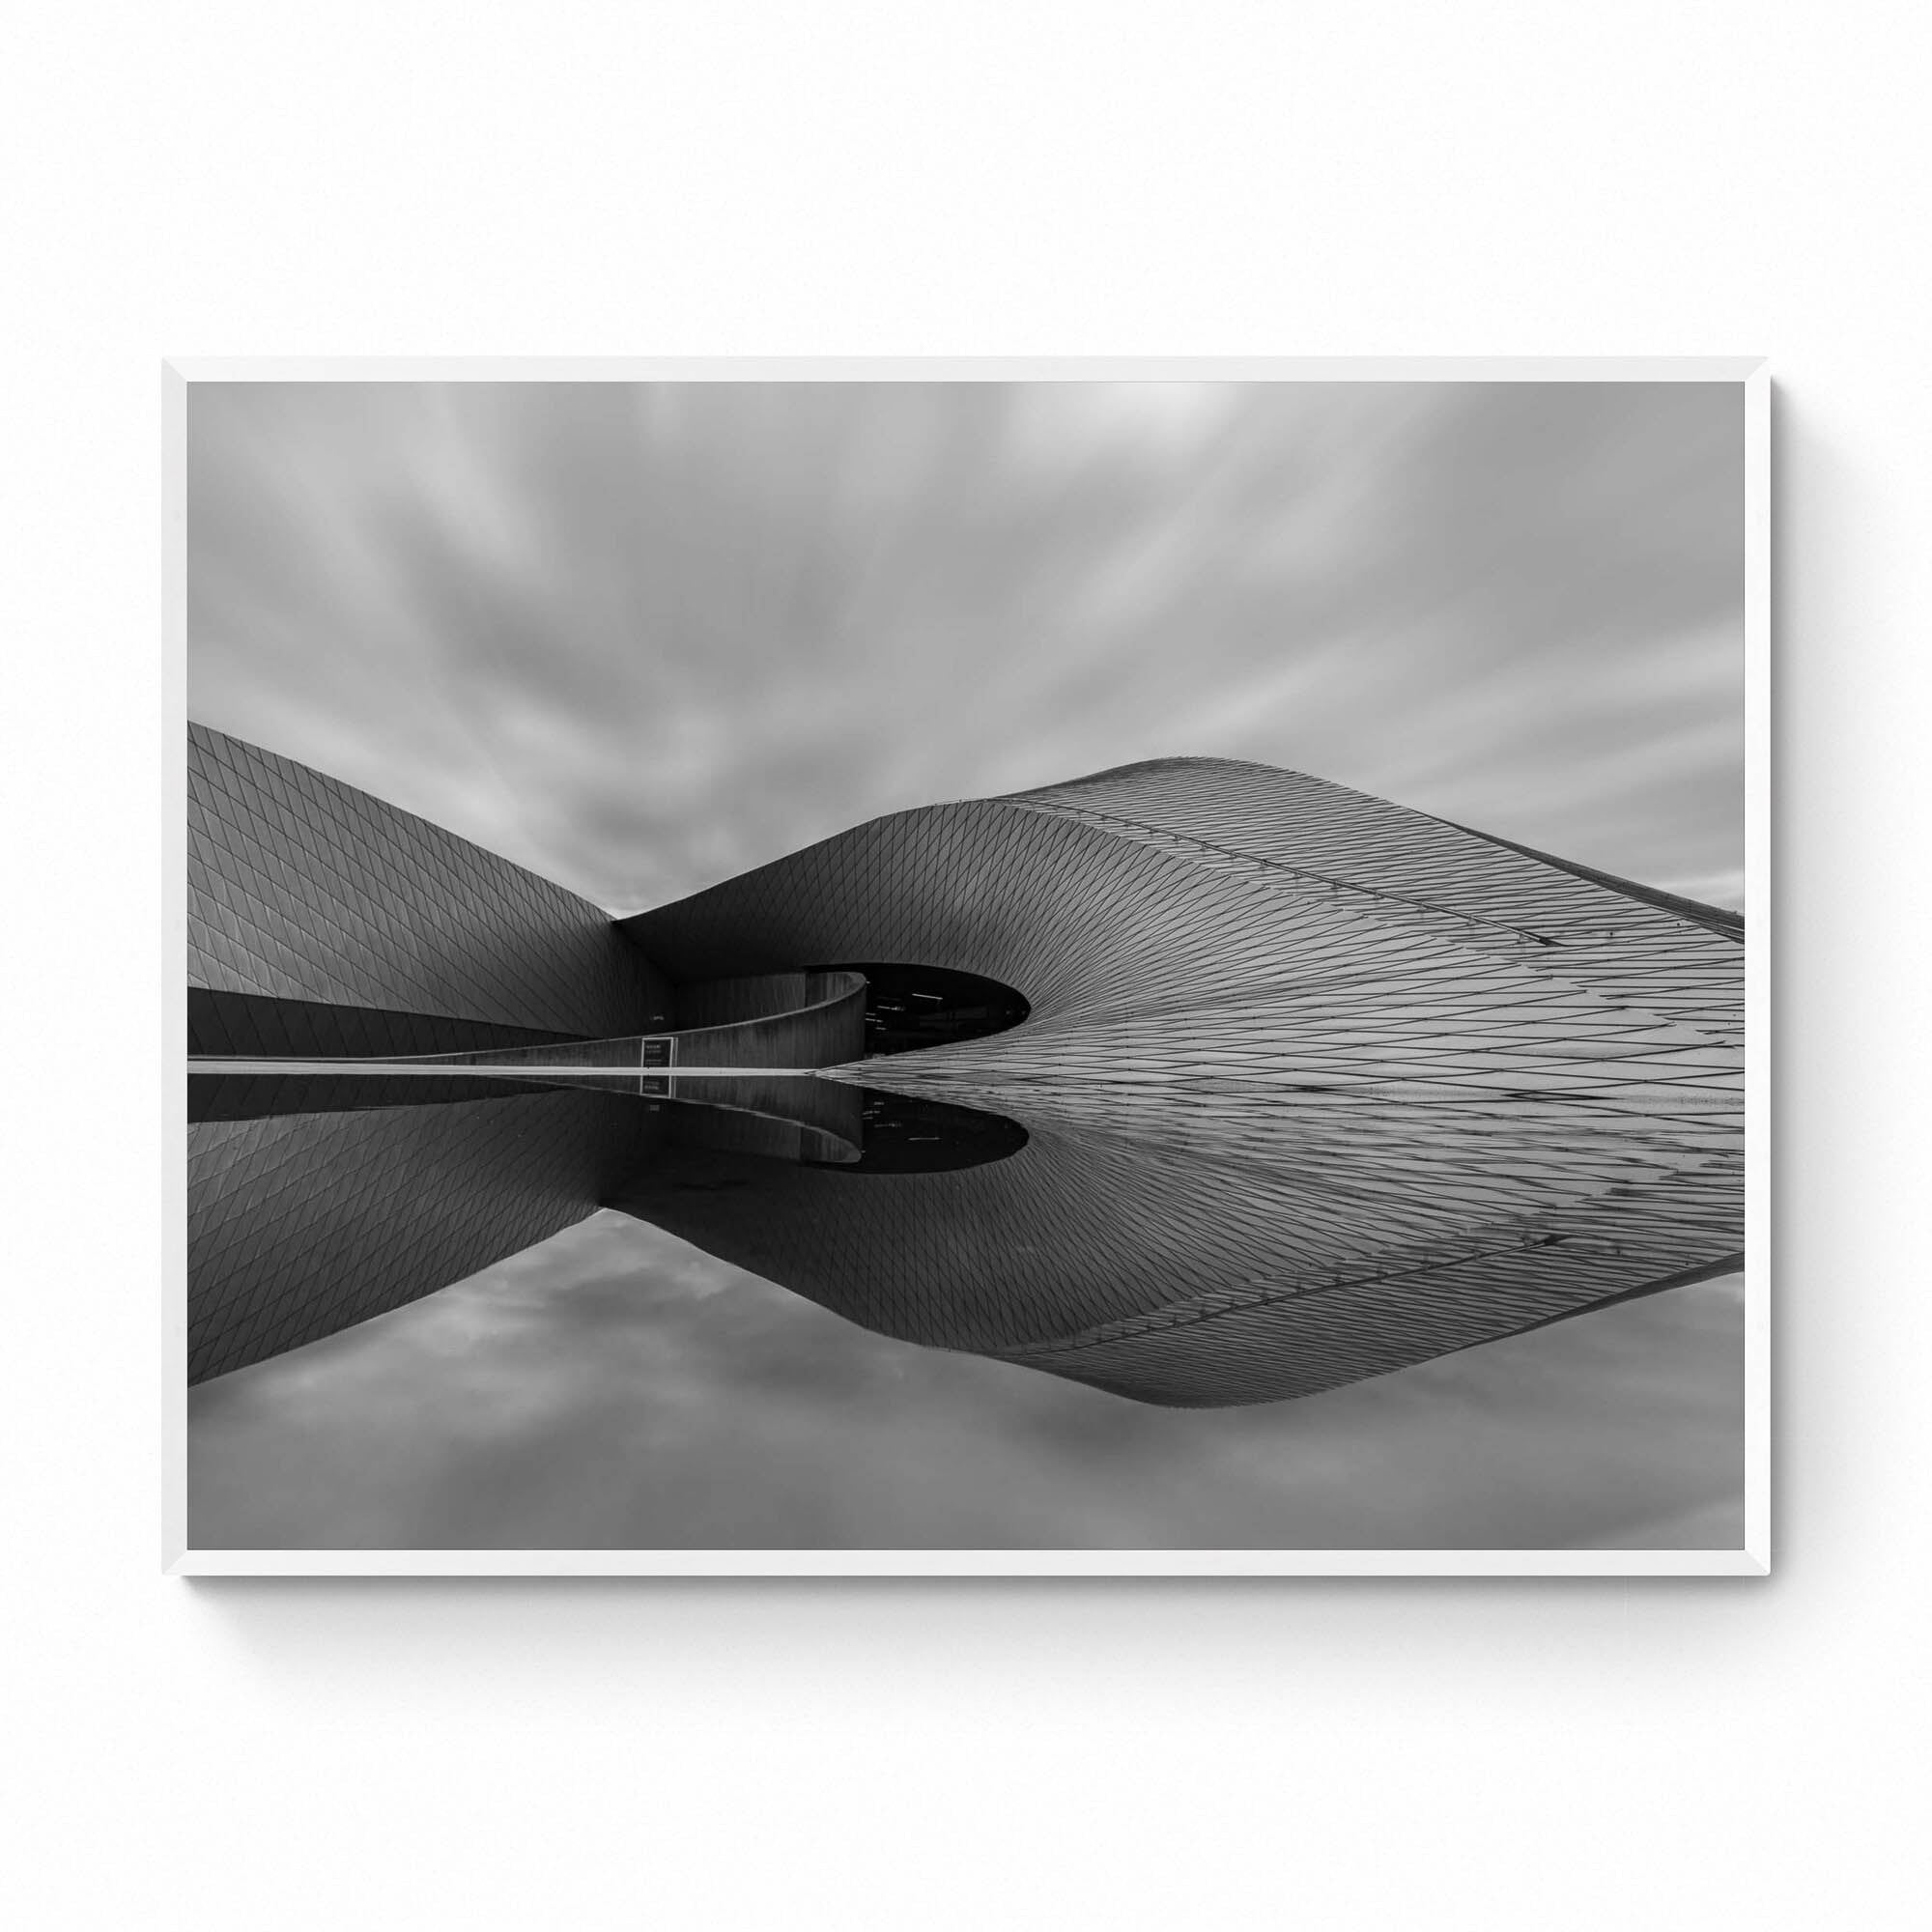 Black and white image of The Blue Planet Aquarium in Copenhagen with its reflective, wavy facade against a blurred sky.